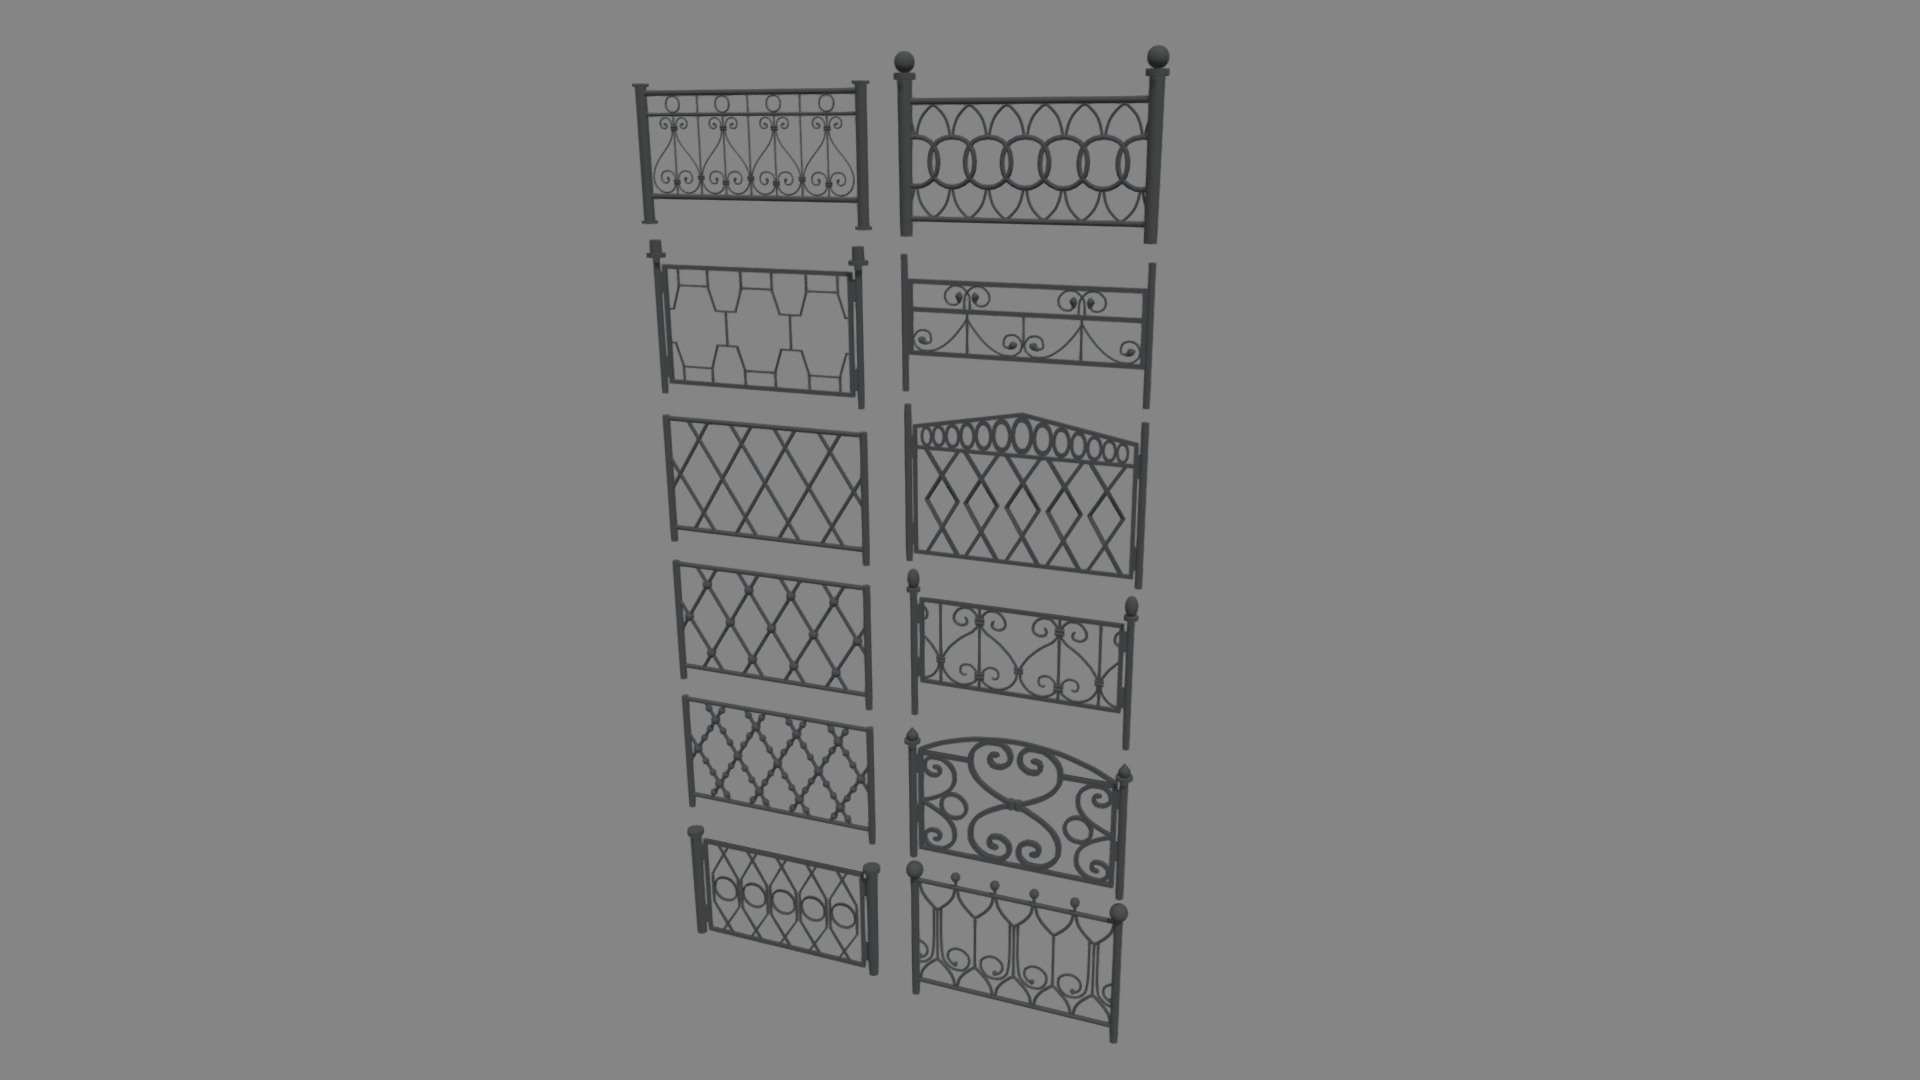 This model contains a Fences Pack based on real city fences which i modeled in Maya 2018. There is one unique material, a black material with 12 different UVS, one for each different fence which are available individually on my profile.

These models will be part of a huge city elements pack which will be added as a big pack and separately on my profile.

If you need any kind of help contact me, i will help you with everything i can. If you like the model please give me some feedback, I would appreciate it.

Don’t doubt on contacting me, i would be very happy to help. If you experience any kind of difficulties, be sure to contact me and i will help you. Sincerely Yours, ViperJr3D - Fences Pack - Buy Royalty Free 3D model by ViperJr3D 3d model